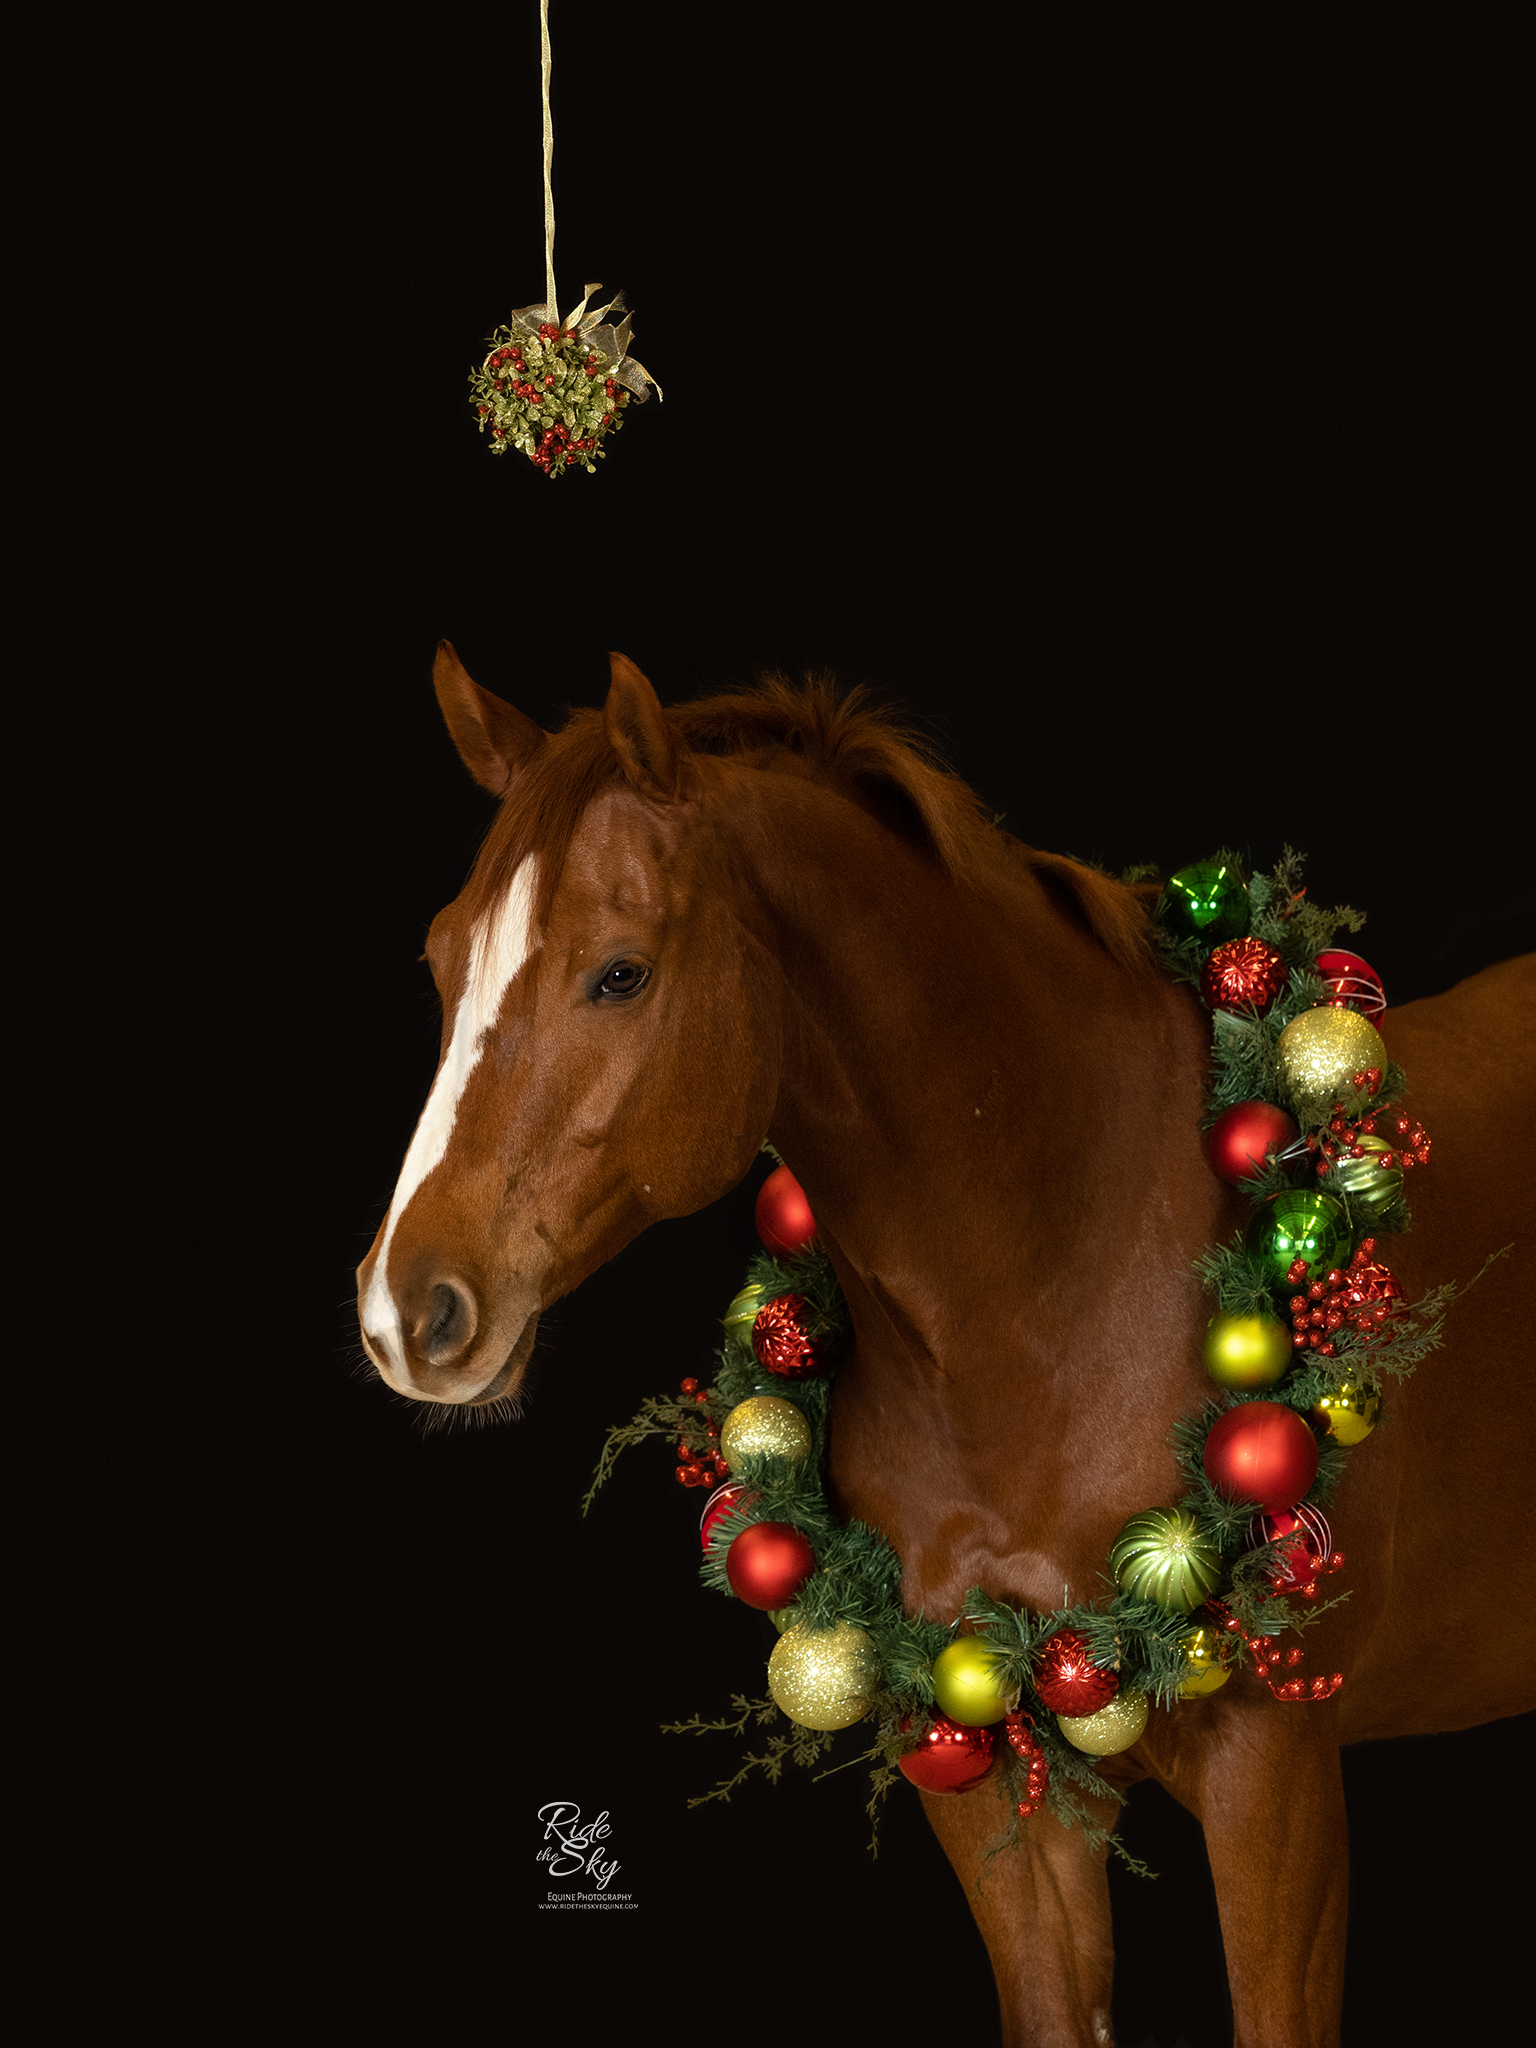 Chestnut Horse wearing holiday wreath and standing under the mistletoe